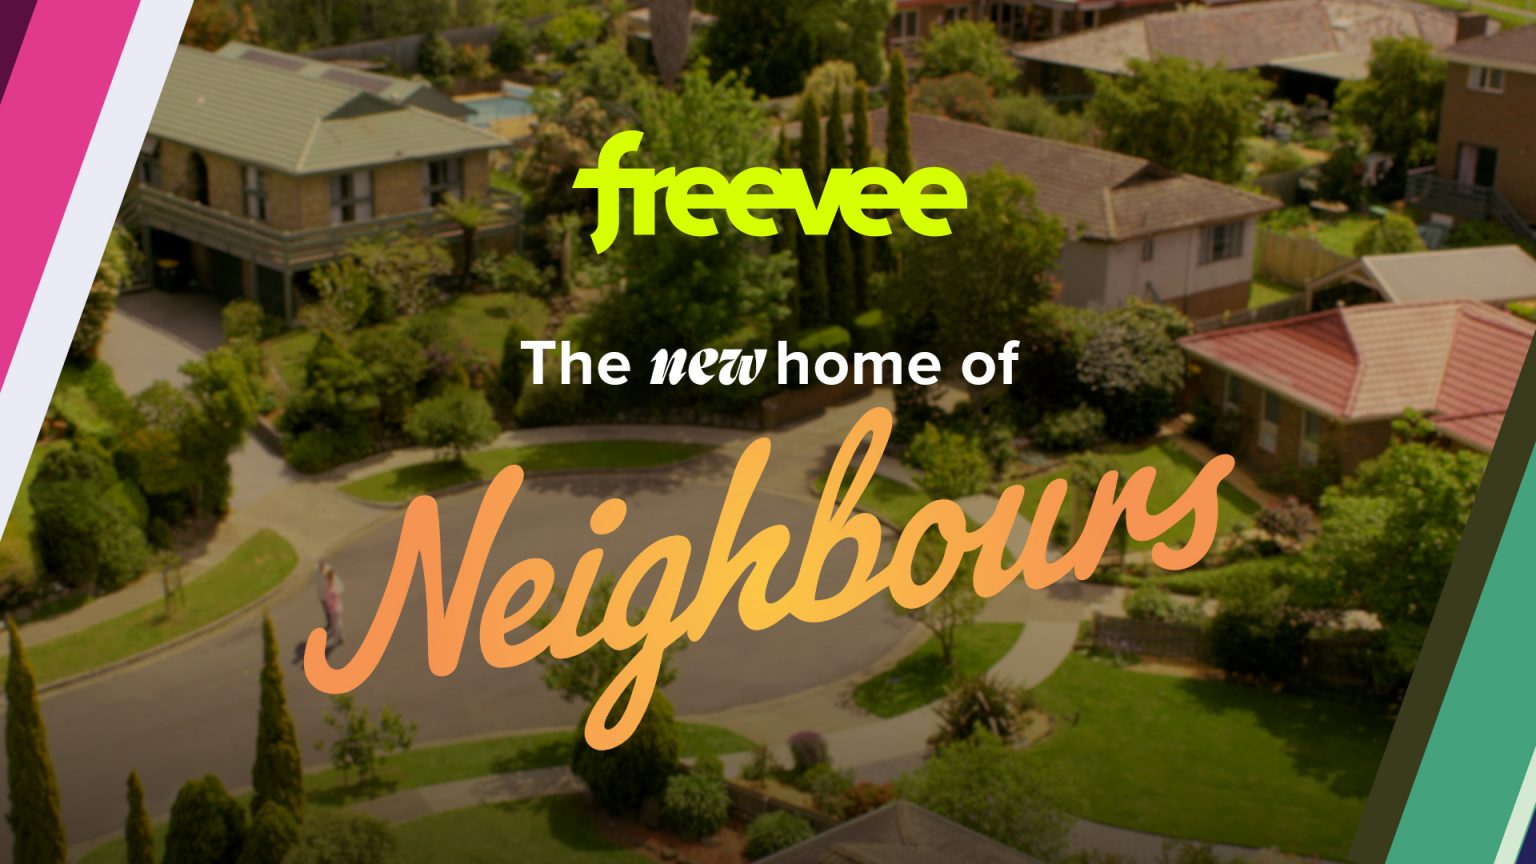 Amazon Freevee saves Neighbours Advanced Television